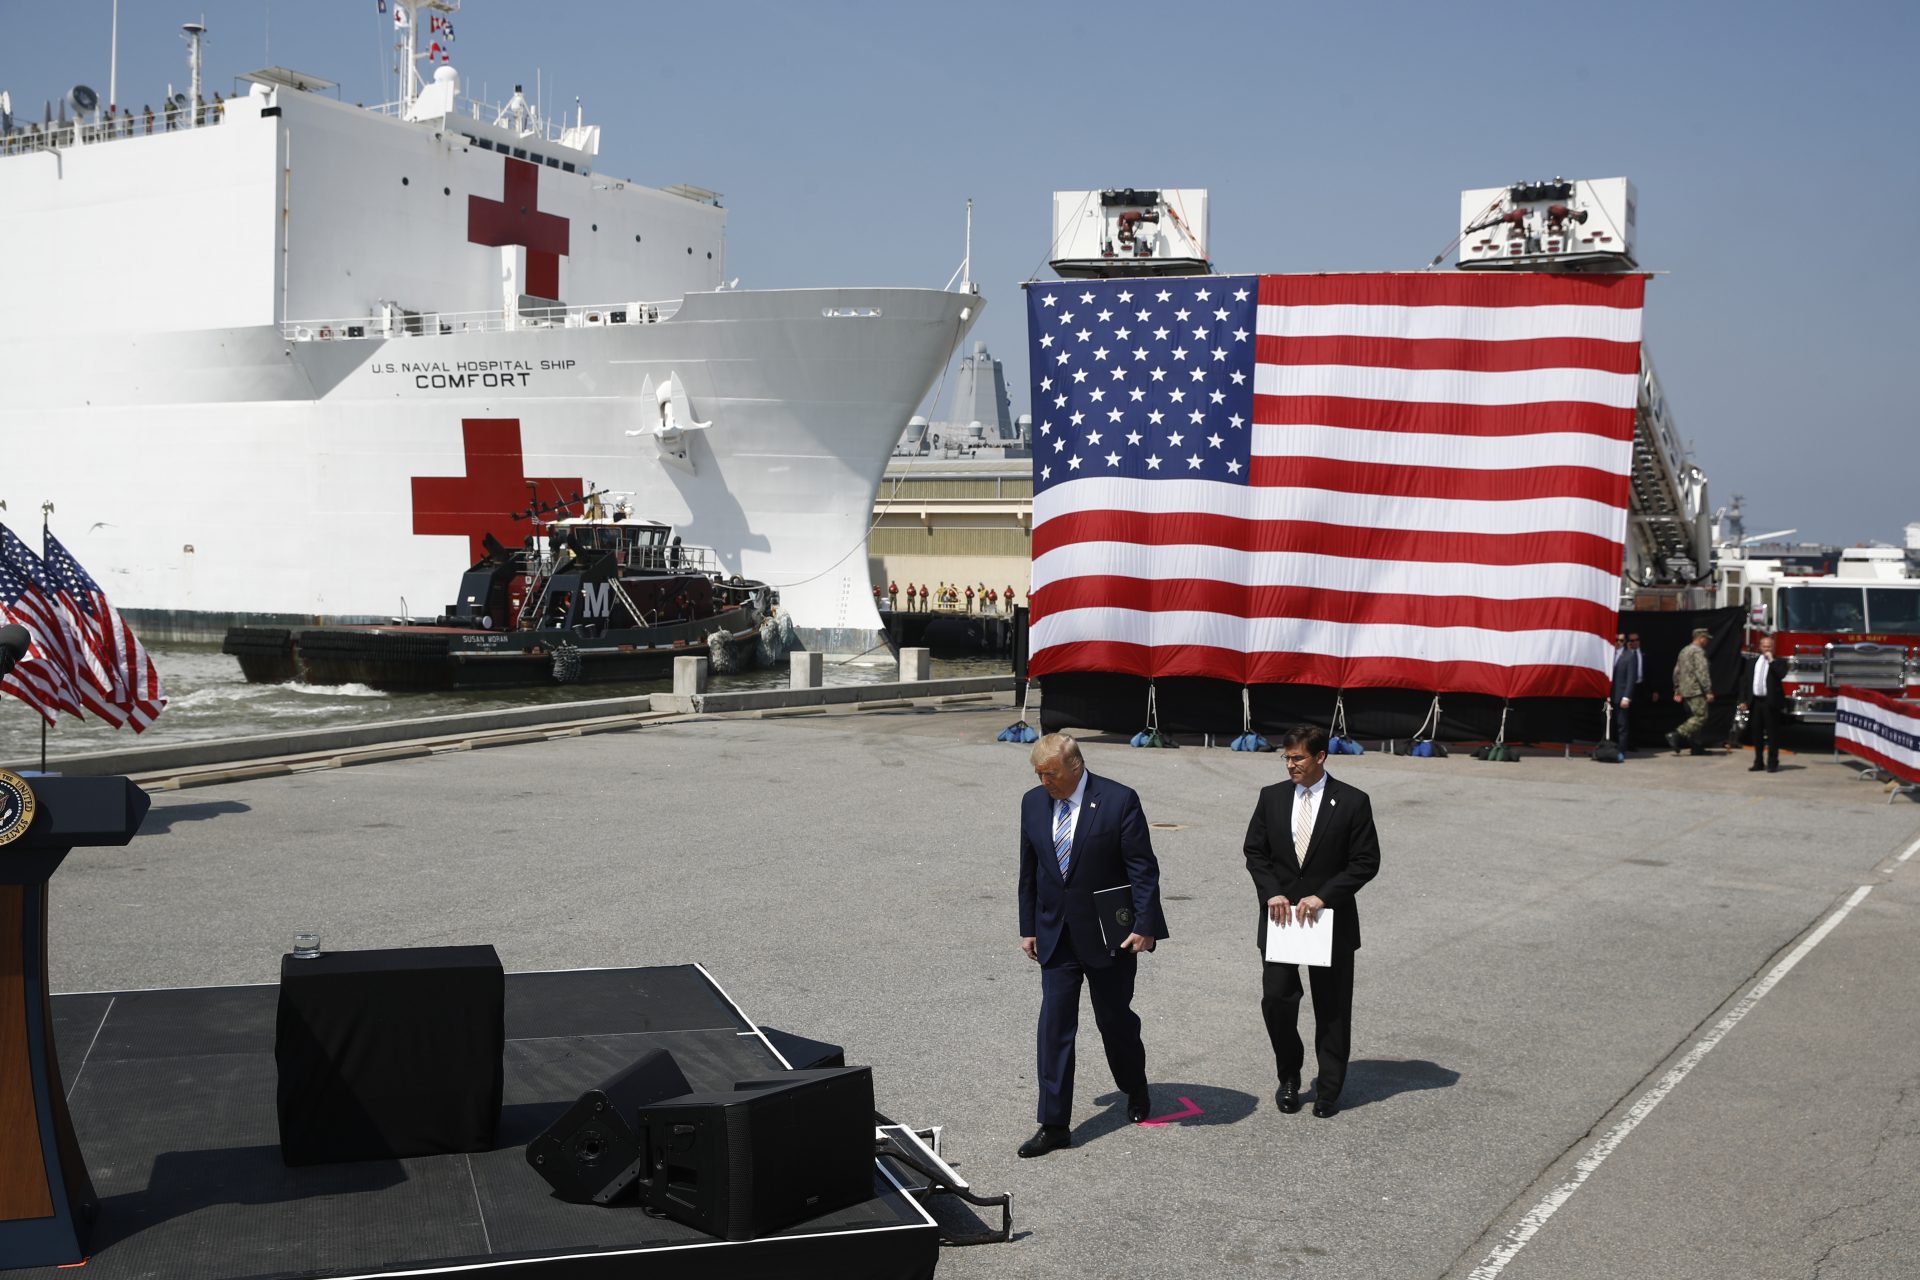 President Donald Trump and Defense Secretary Mark Esper arrive to speak in front of the U.S. Navy hospital ship USNS Comfort at Naval Station Norfolk in Norfolk, Va., Saturday, March 28, 2020. The ship is departing for New York to assist hospitals responding to the coronavirus outbreak.